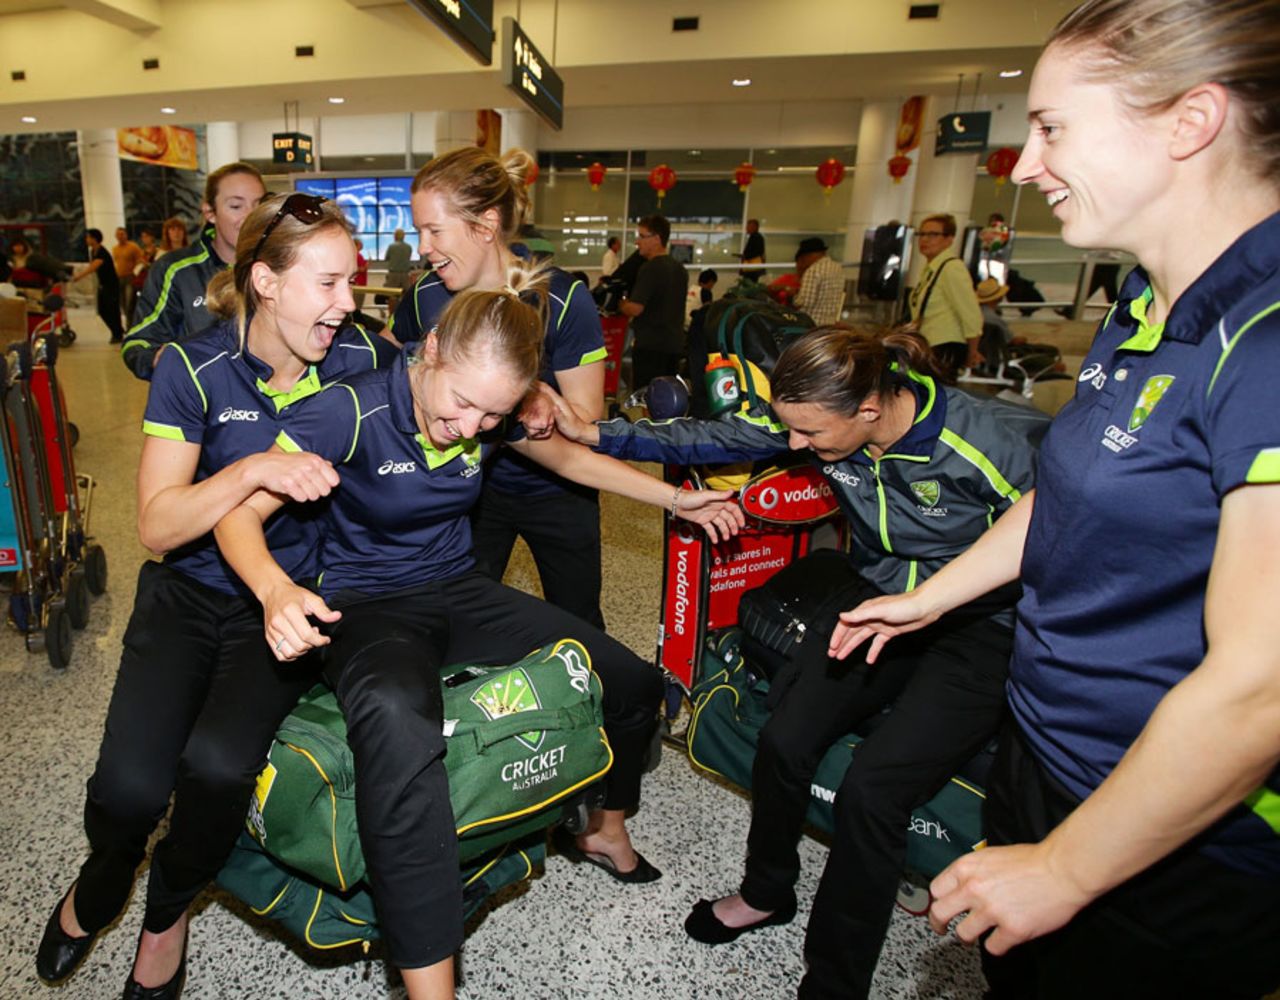 The Australian women's team in good spirits after returning home from their World Cup win in India, ICC Women's World Cup 2013, Sydney, February 21, 2013